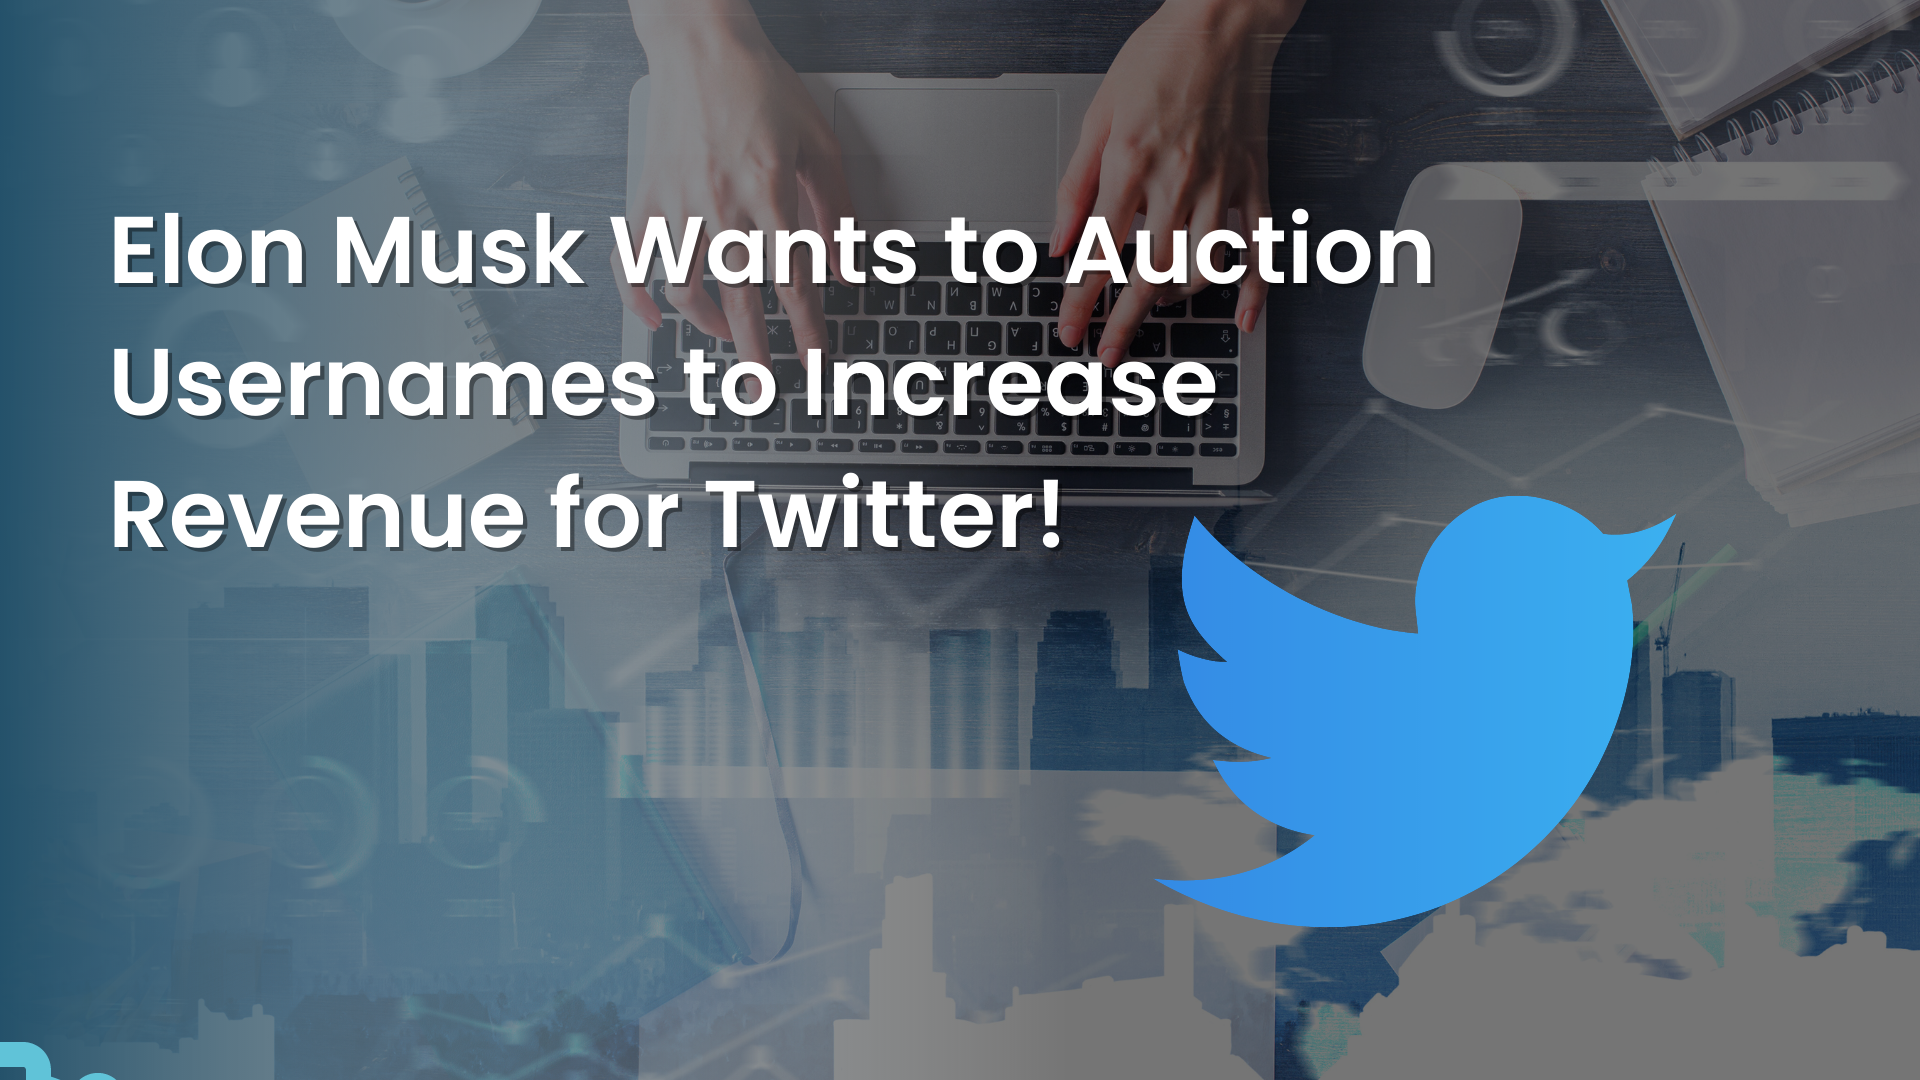 Elon Musk Wants To Auction Usernames To Increase Revenue For Twitter!